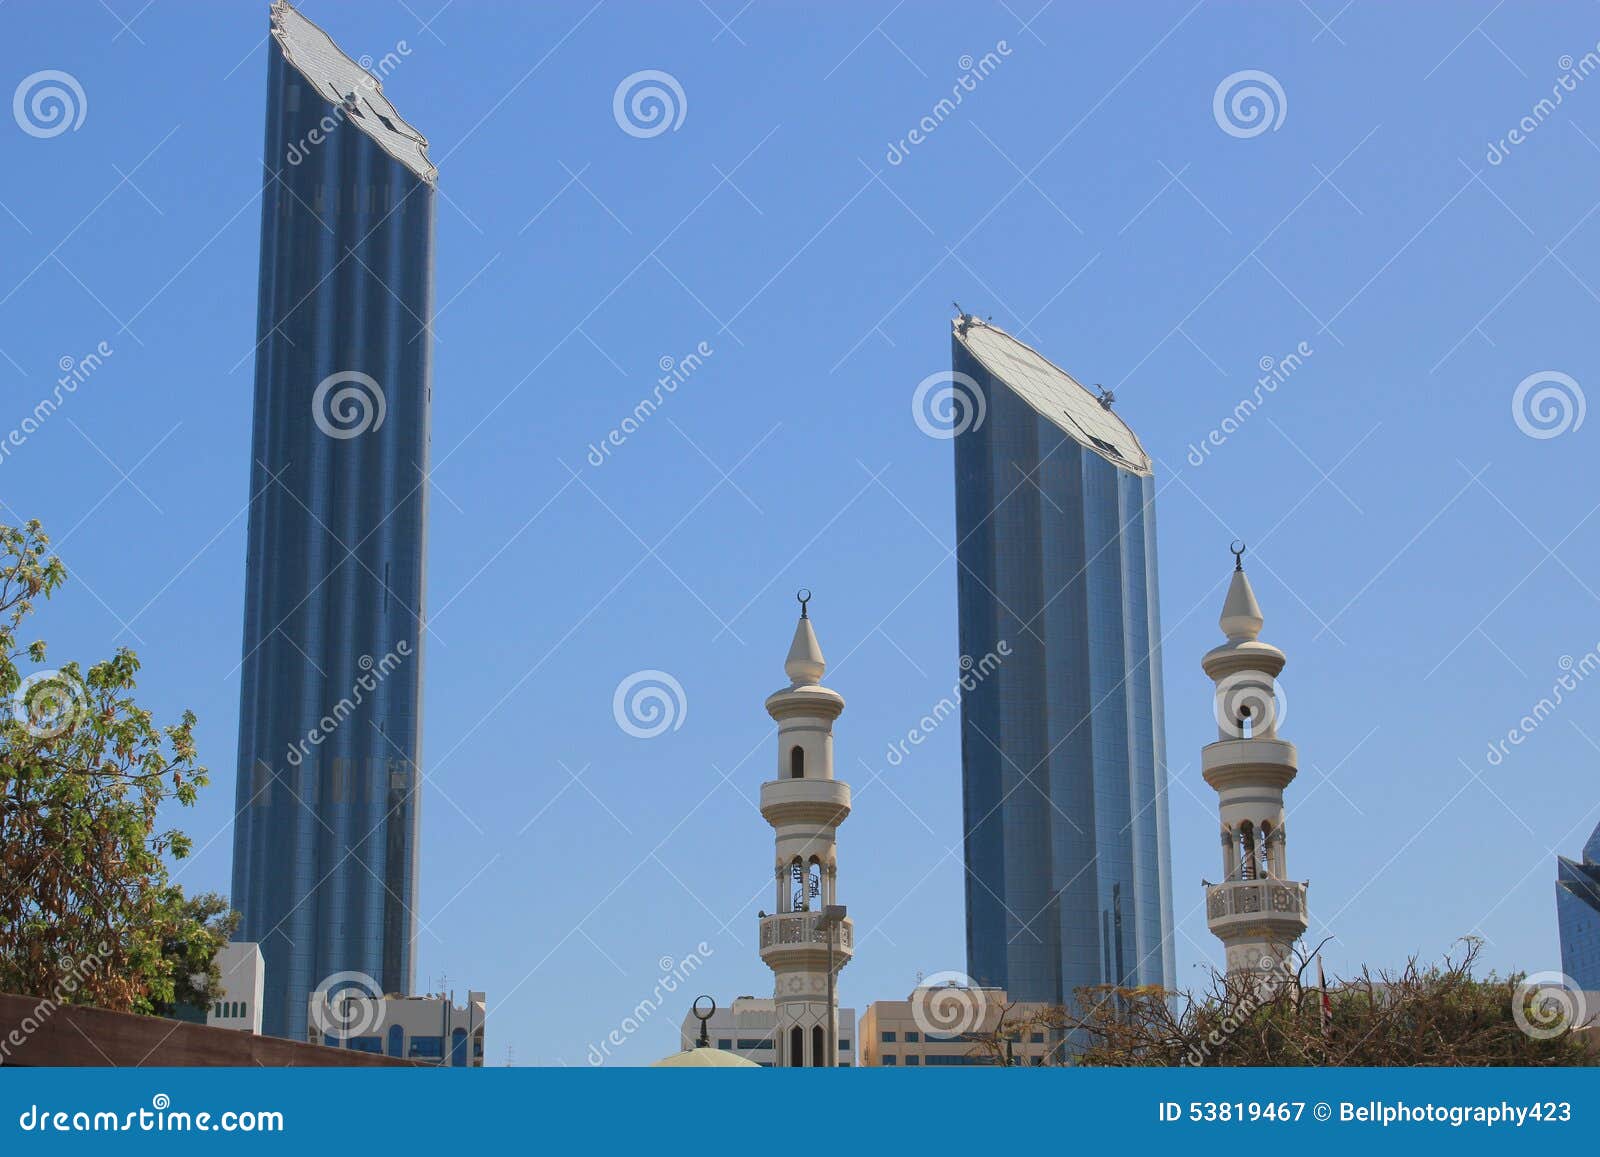 mosque minaretes contrasted with modern skyscrapers